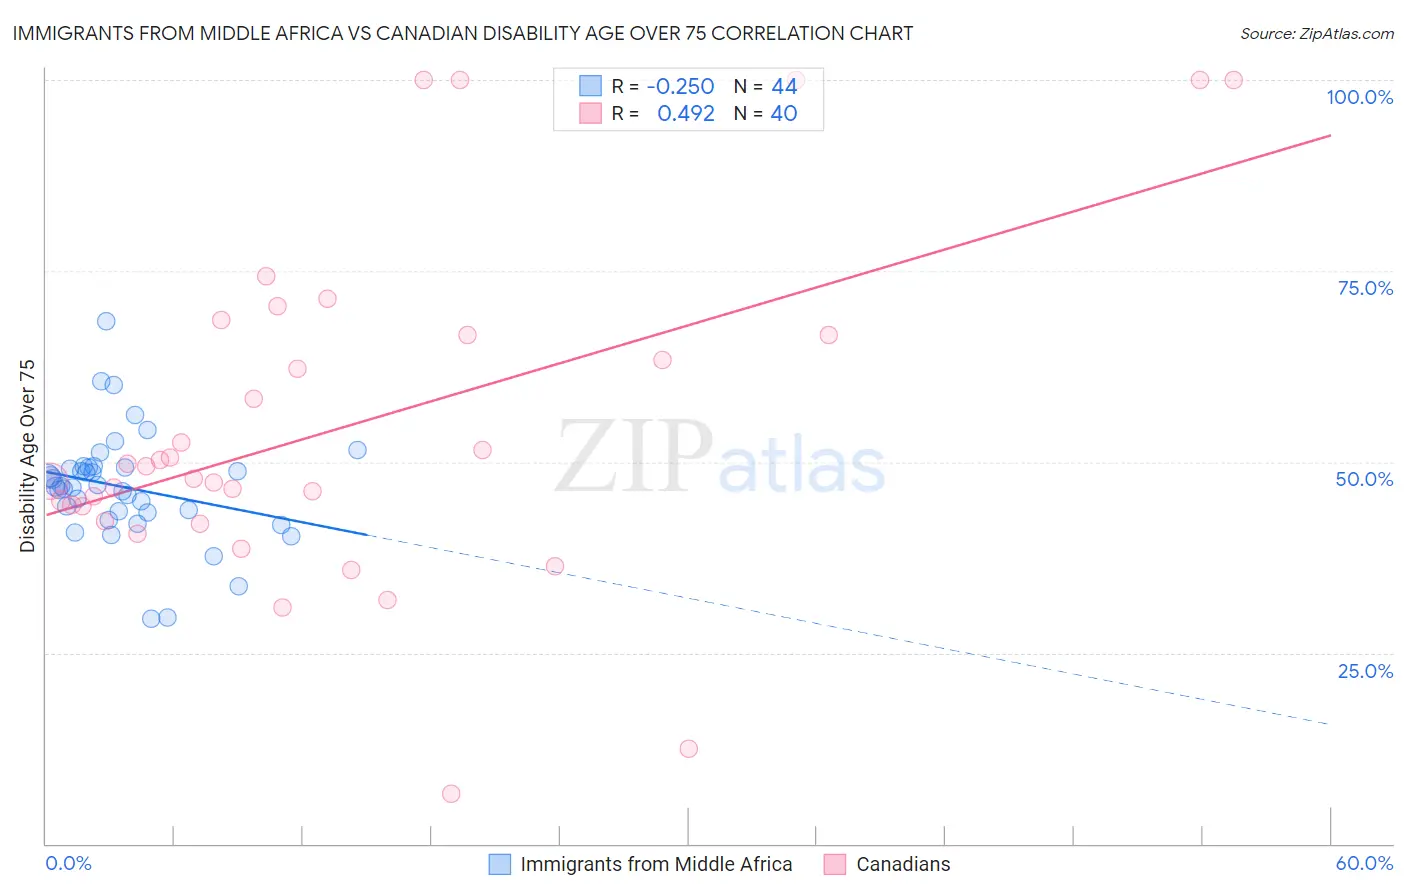 Immigrants from Middle Africa vs Canadian Disability Age Over 75